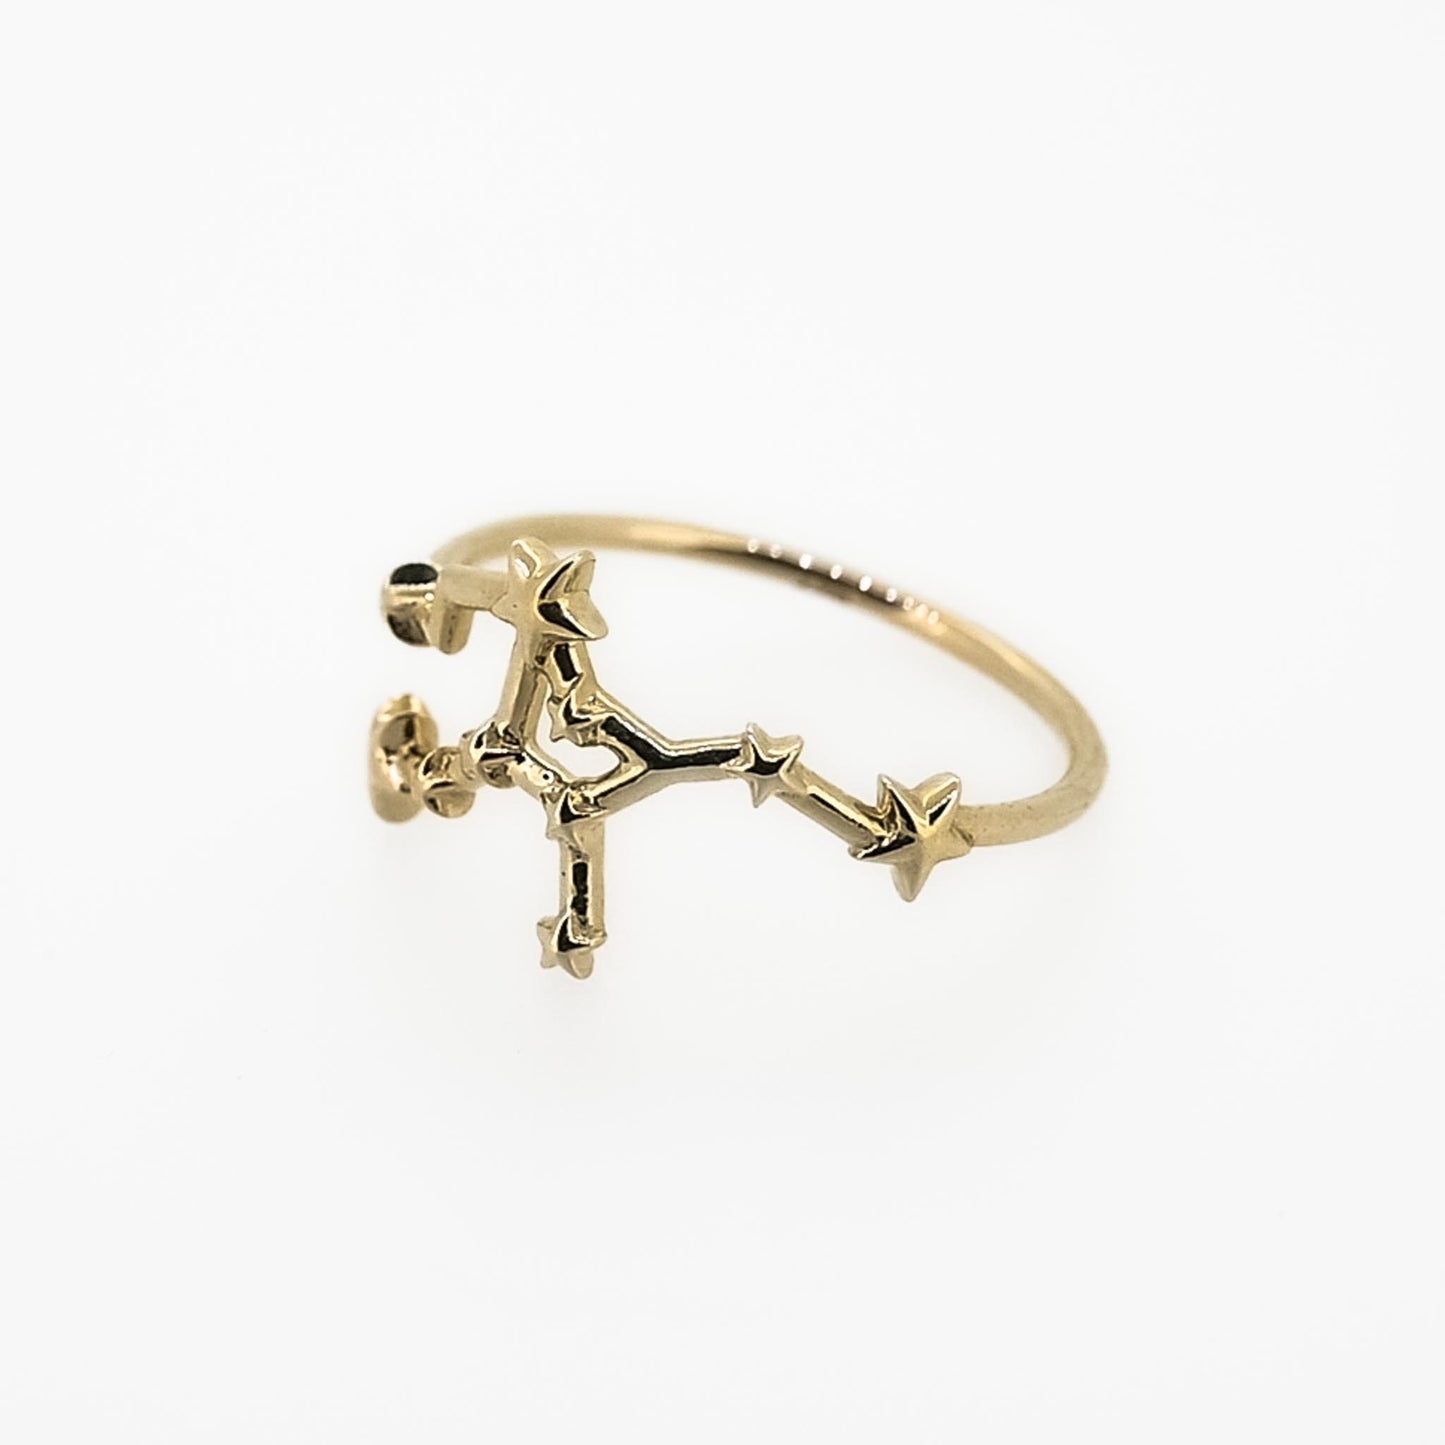 Solid Gold Virgo, Star Sign Dainty Celestial Zodiac Ring in solid 14K Yellow Gold, 14k White Gold, 14K Rose Gold